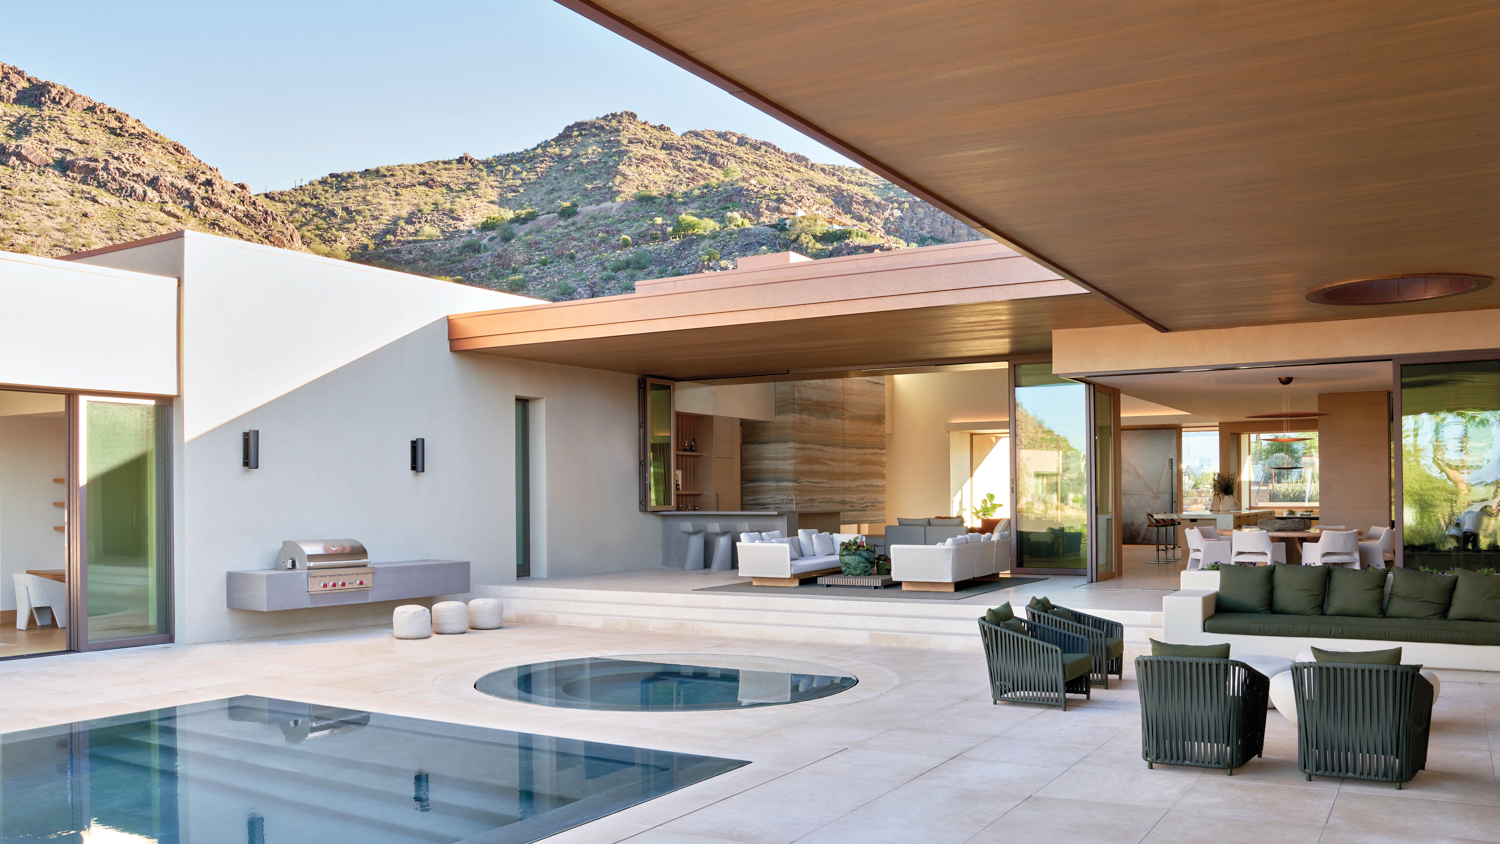 See How A Modernist Paradise Valley Masterpiece Reflects The Desert